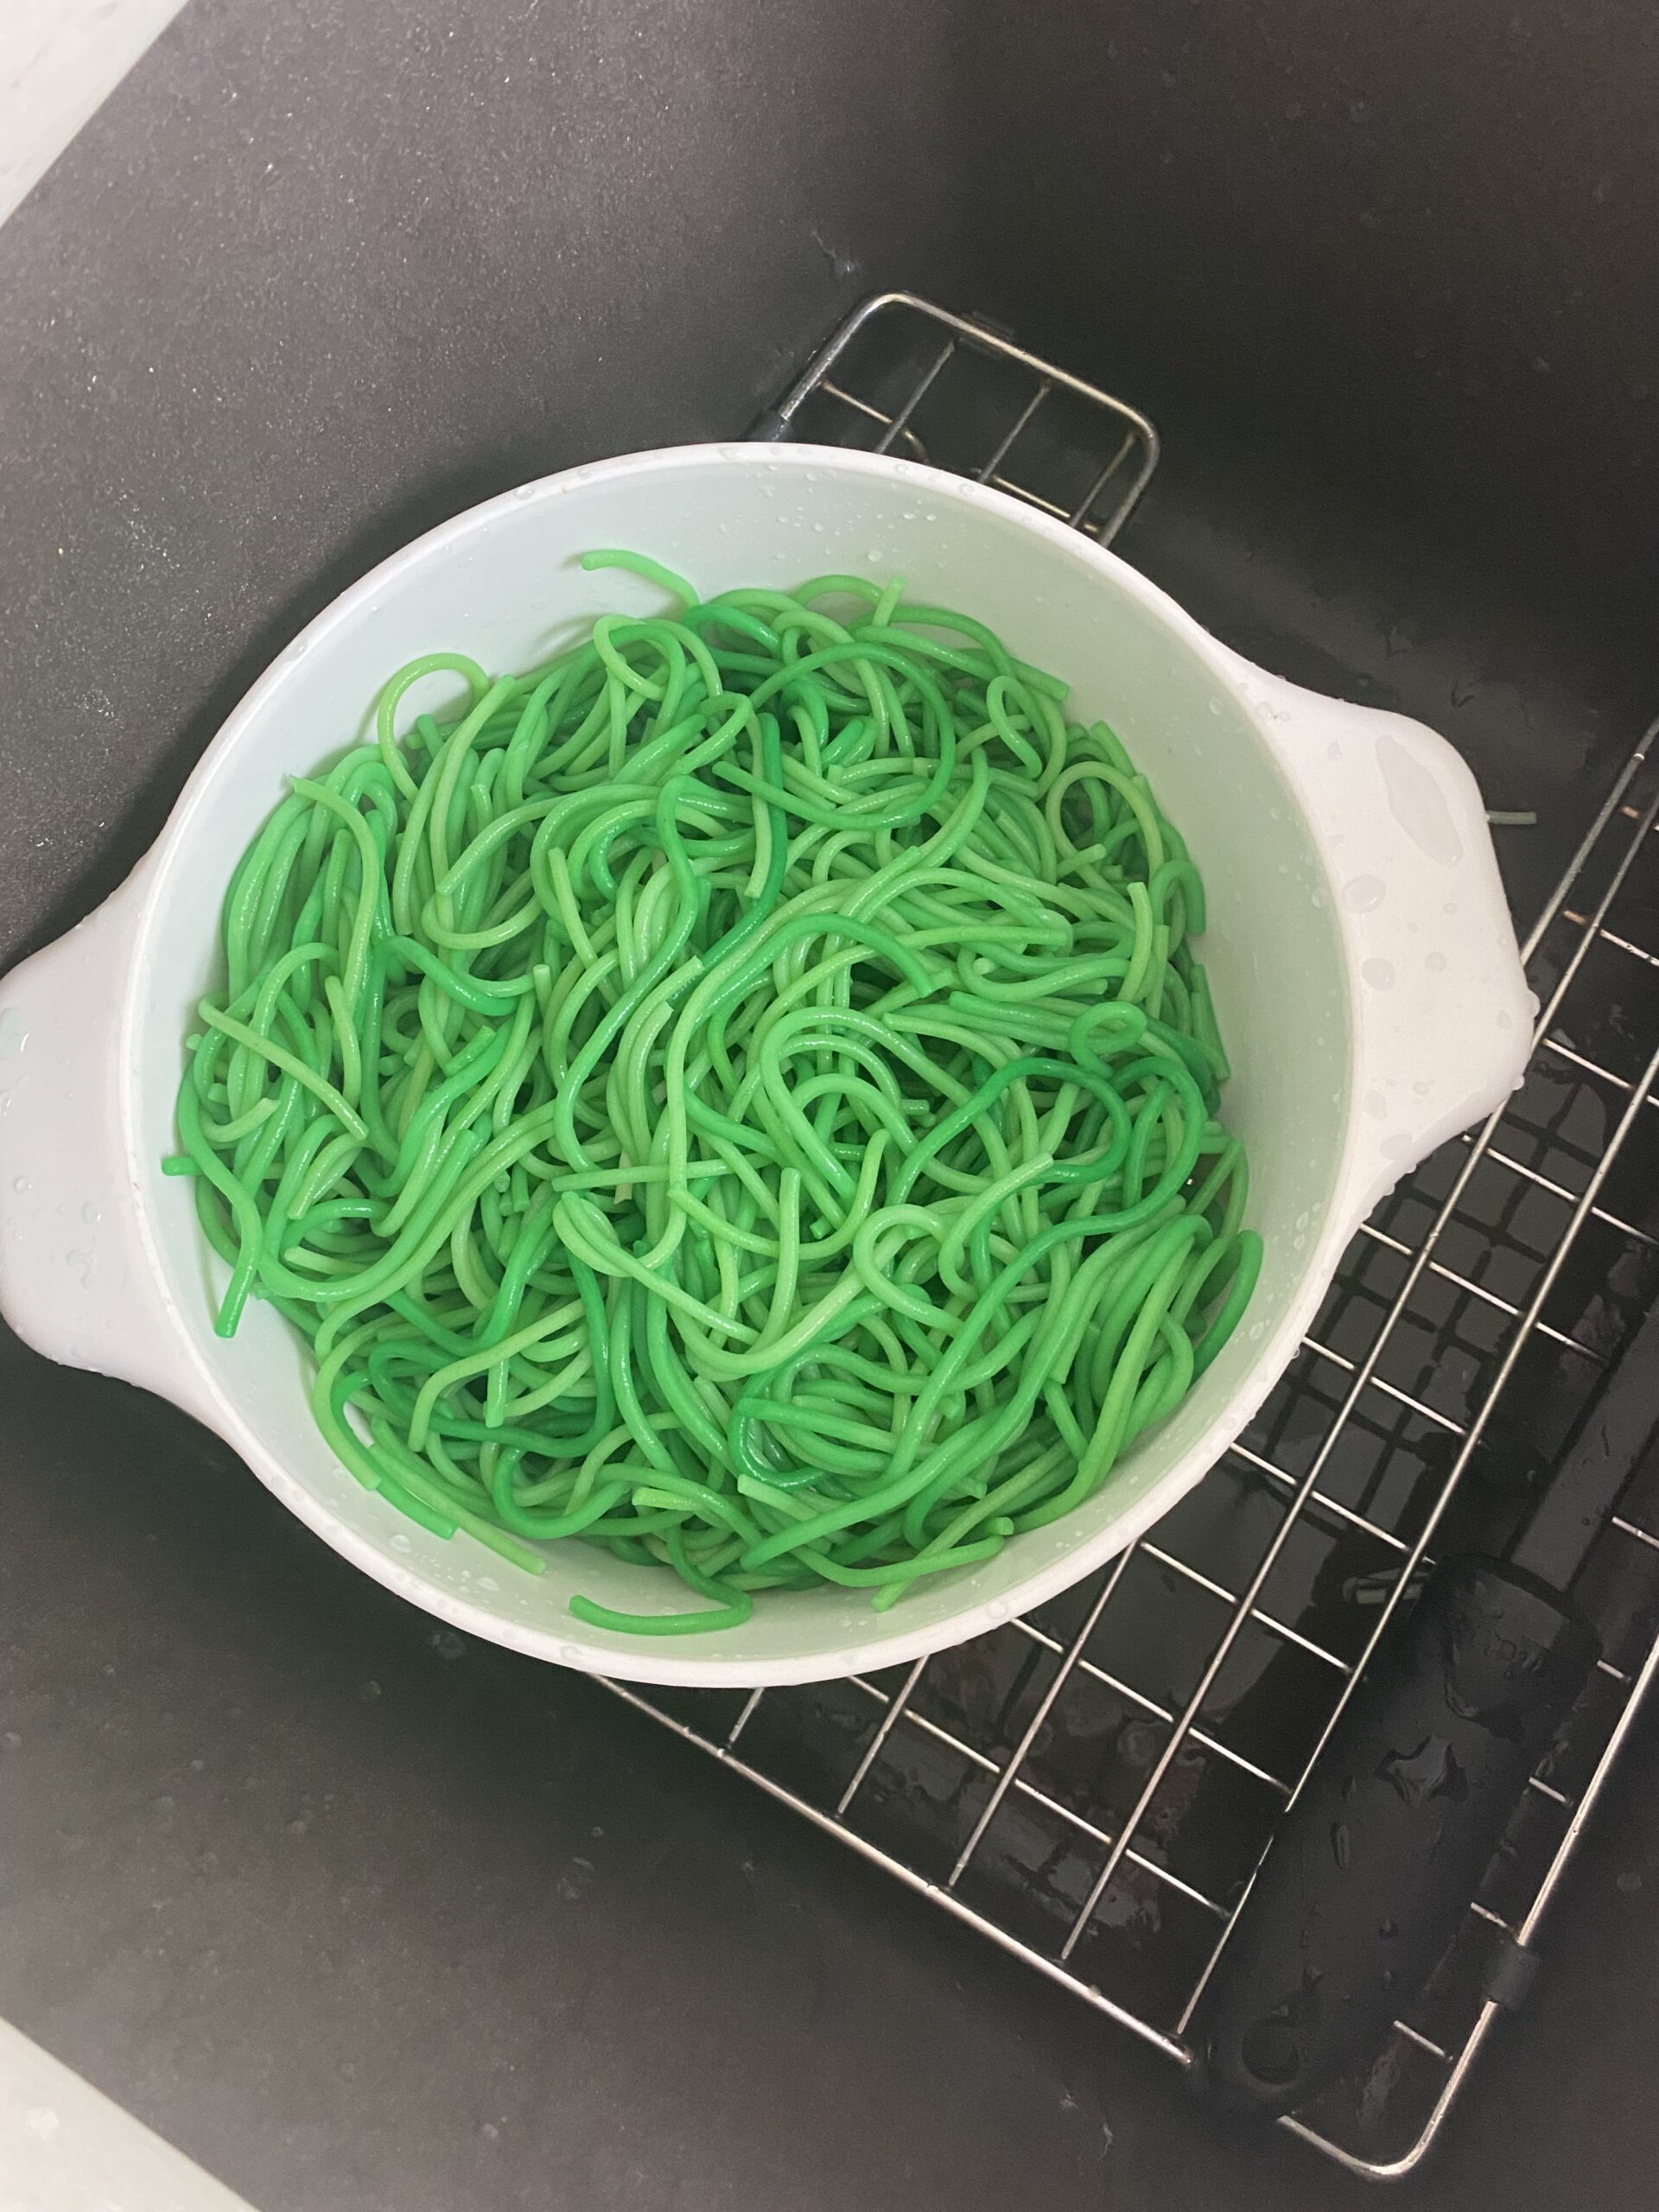 Did you know you can use cooked noodles in a sensory bin? Let me show you how. 